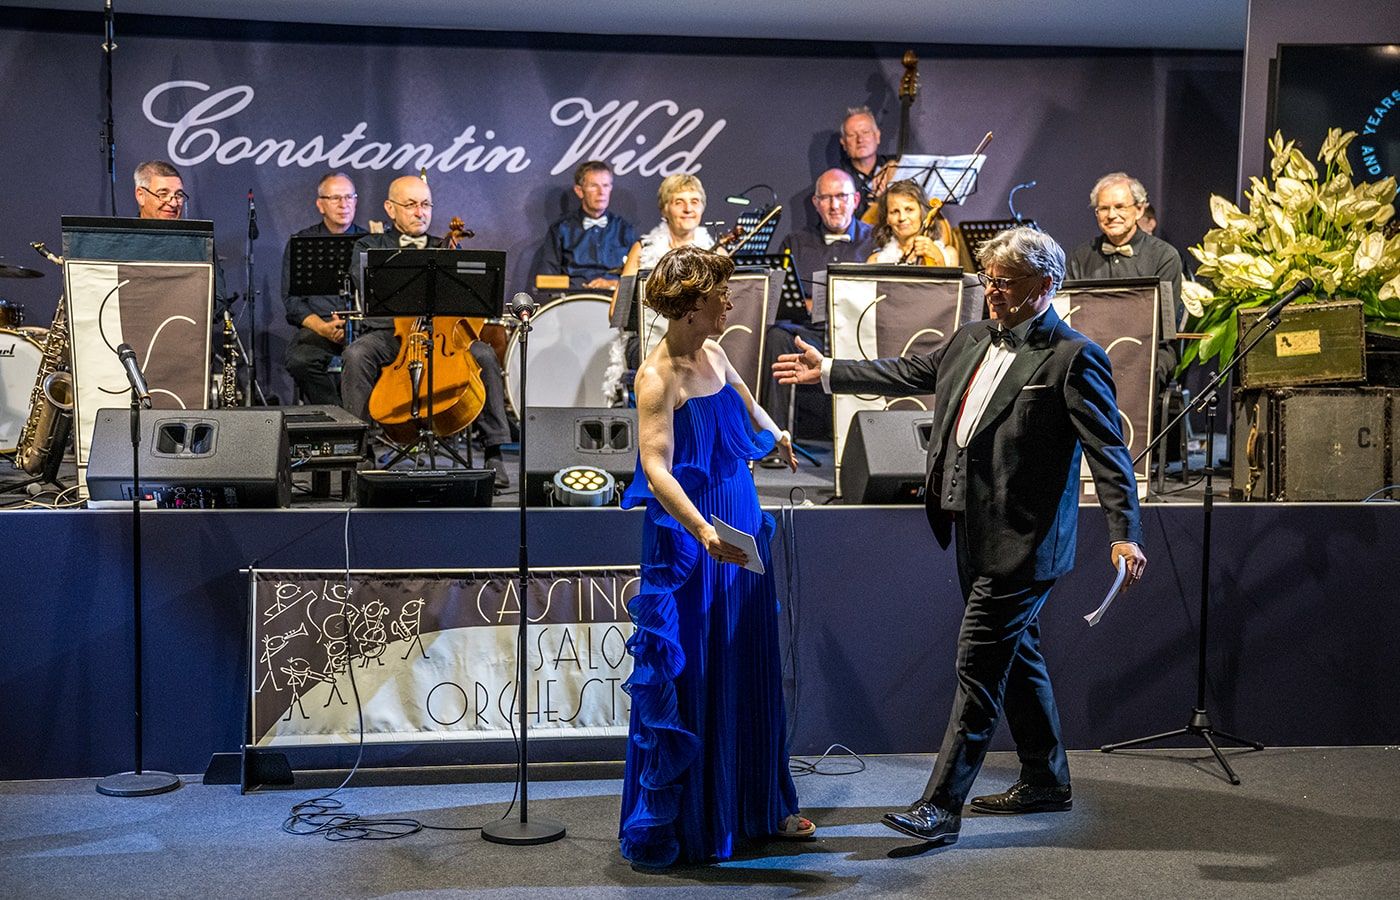 An evening to remember for Constantin Wild and his guests in Idar-Oberstein